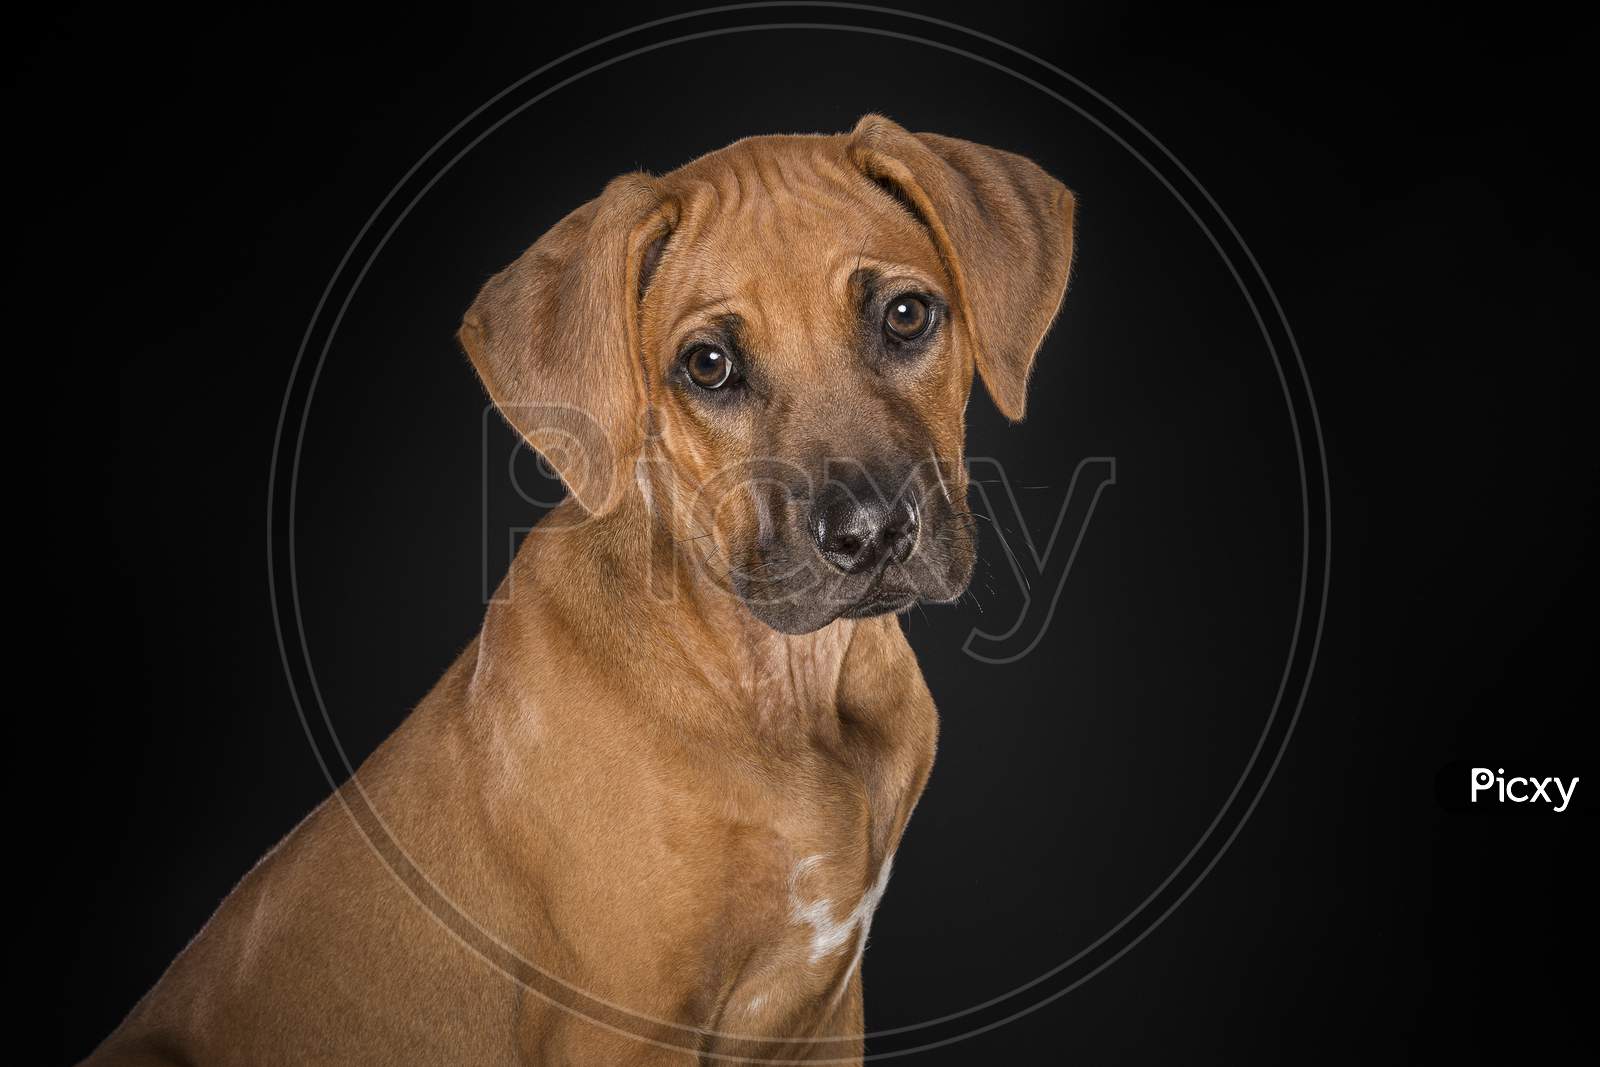 Portrait Of A Rhodesian Ridgeback Puppy Looking At The Camera Seen From The Side At A Black Background